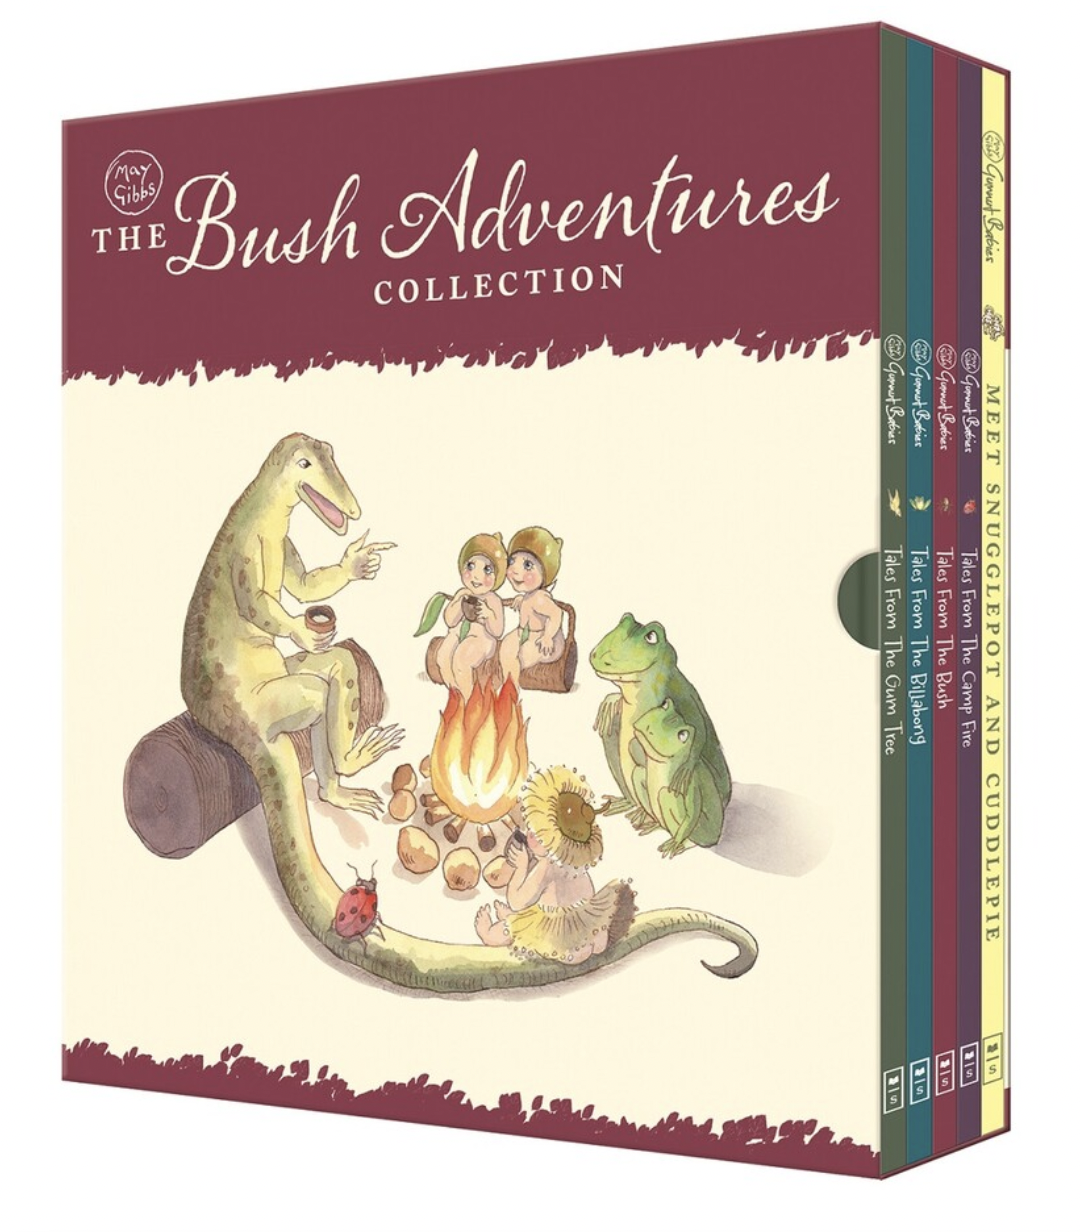 Bush Adventures Collection by May Gibbs